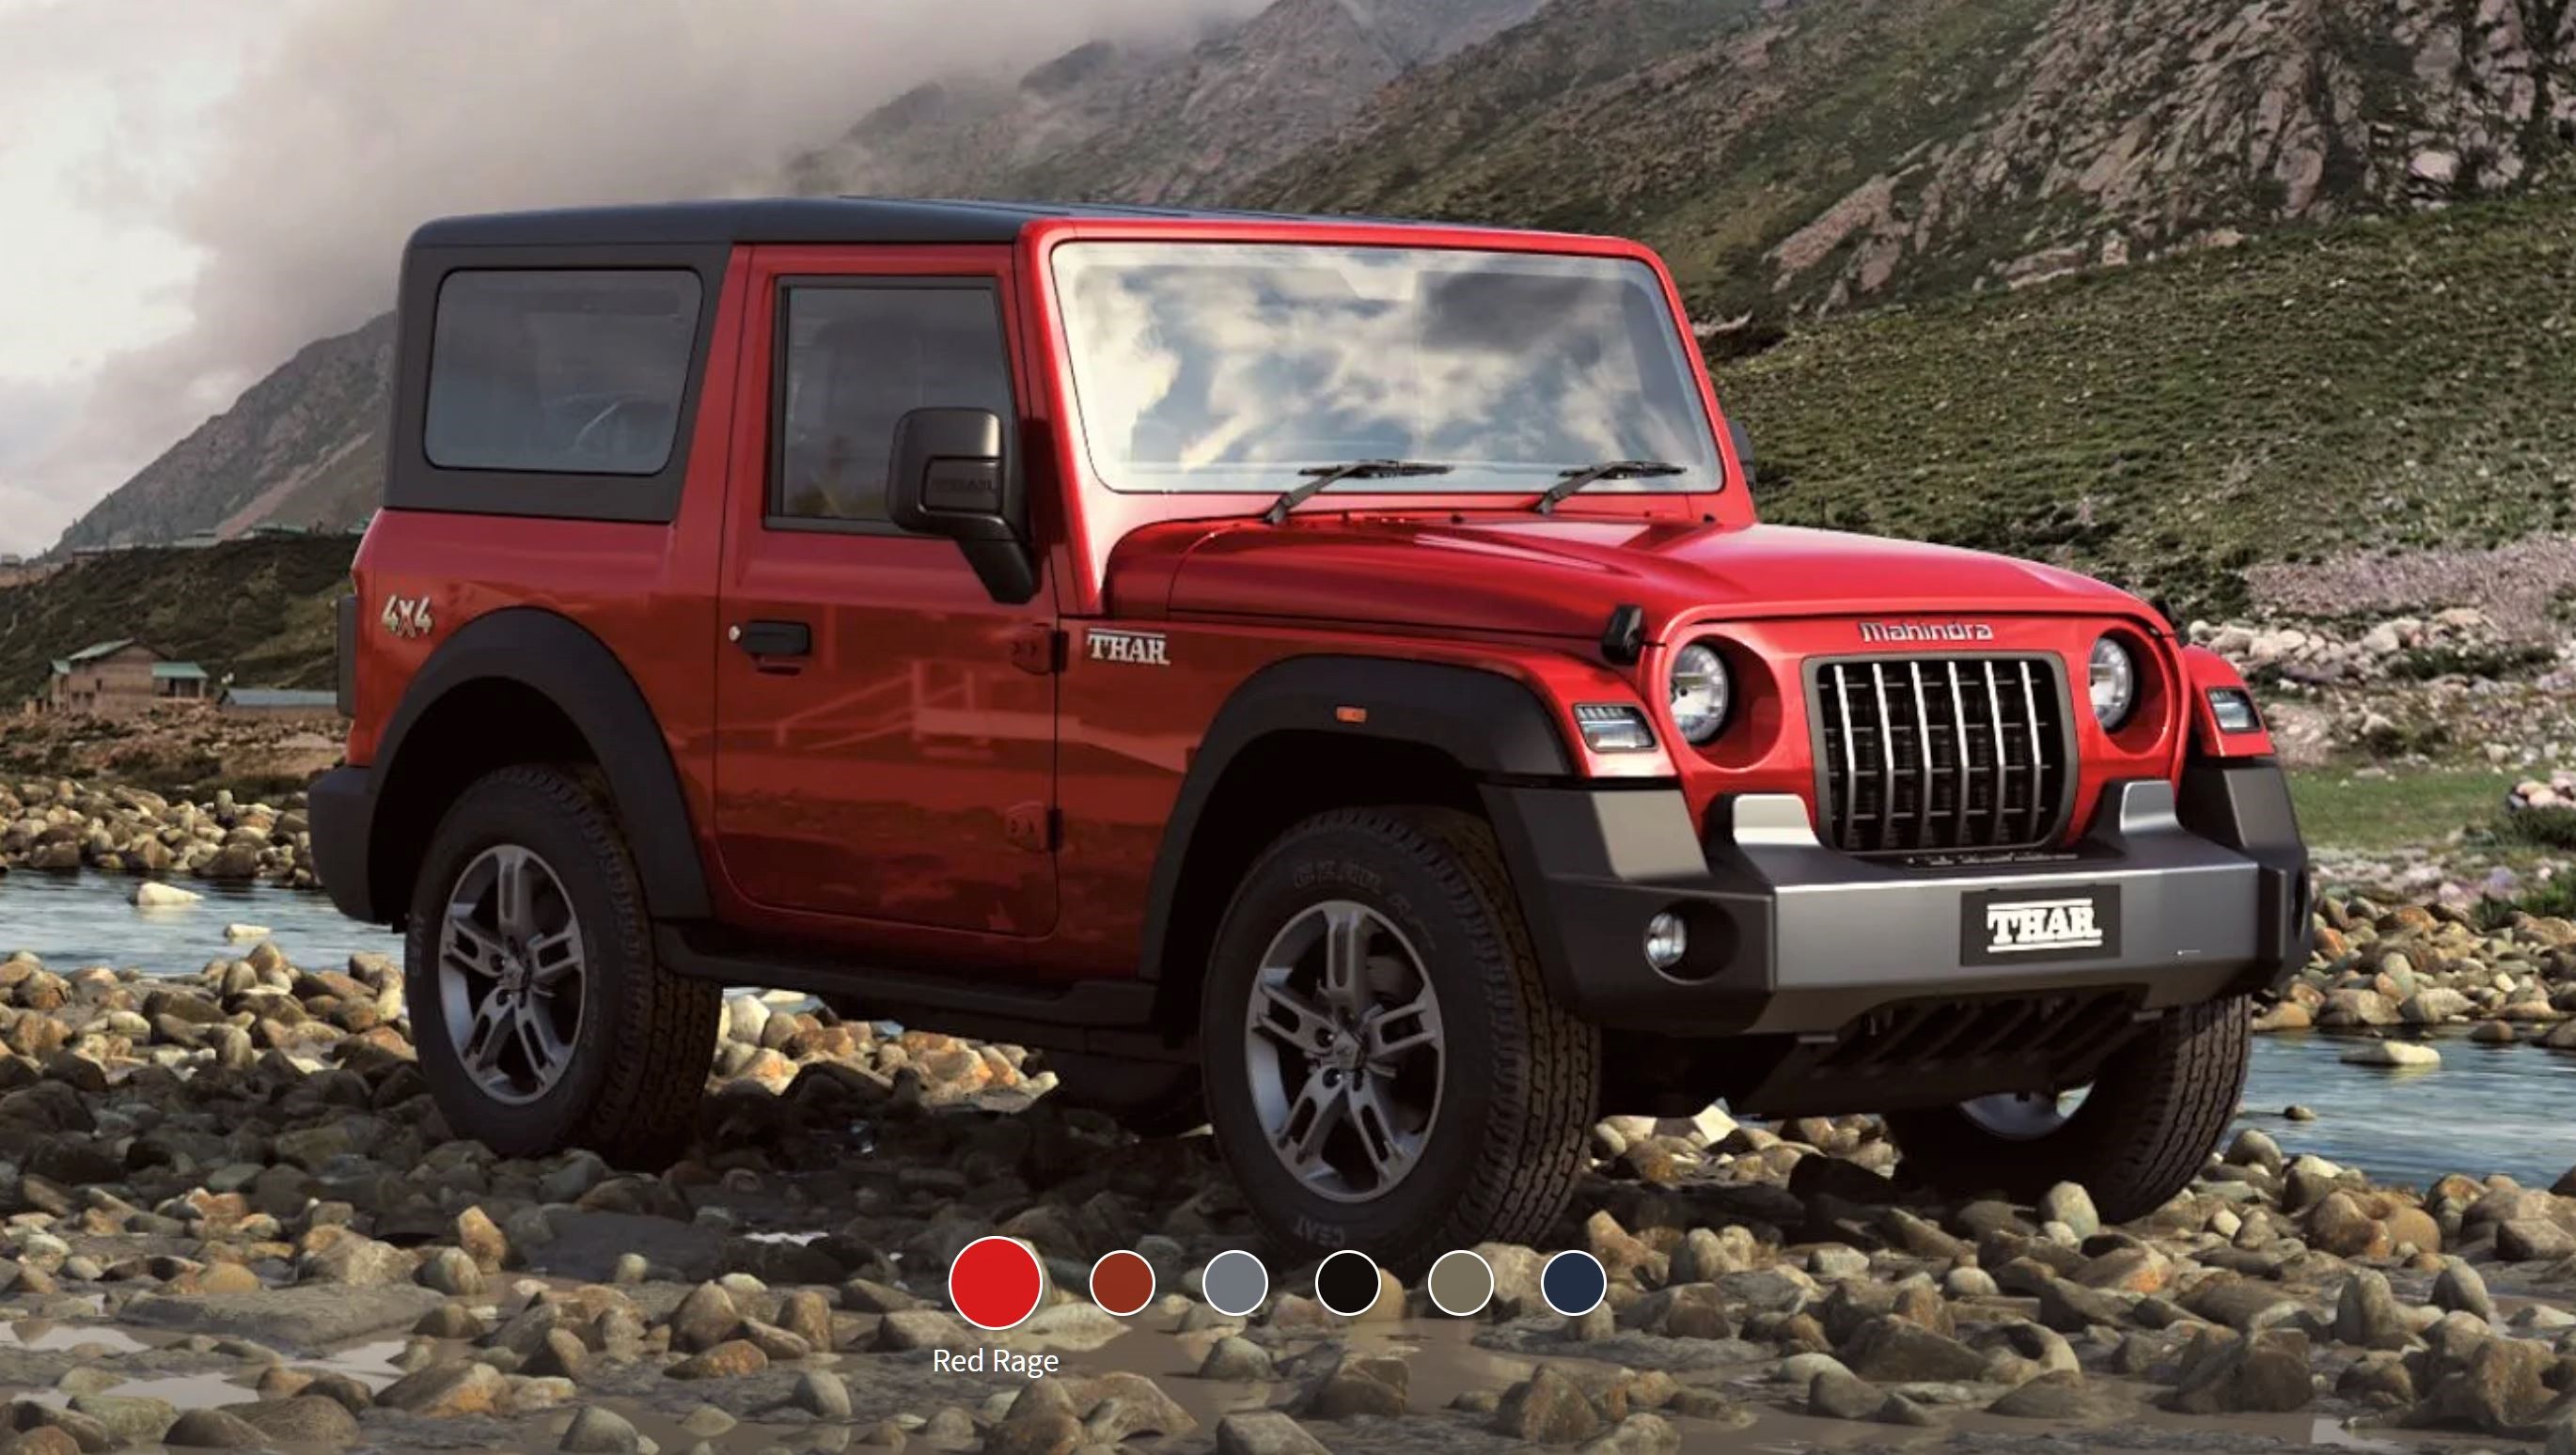 New Mahindra Thar Red Rage Front 3-Quarter View